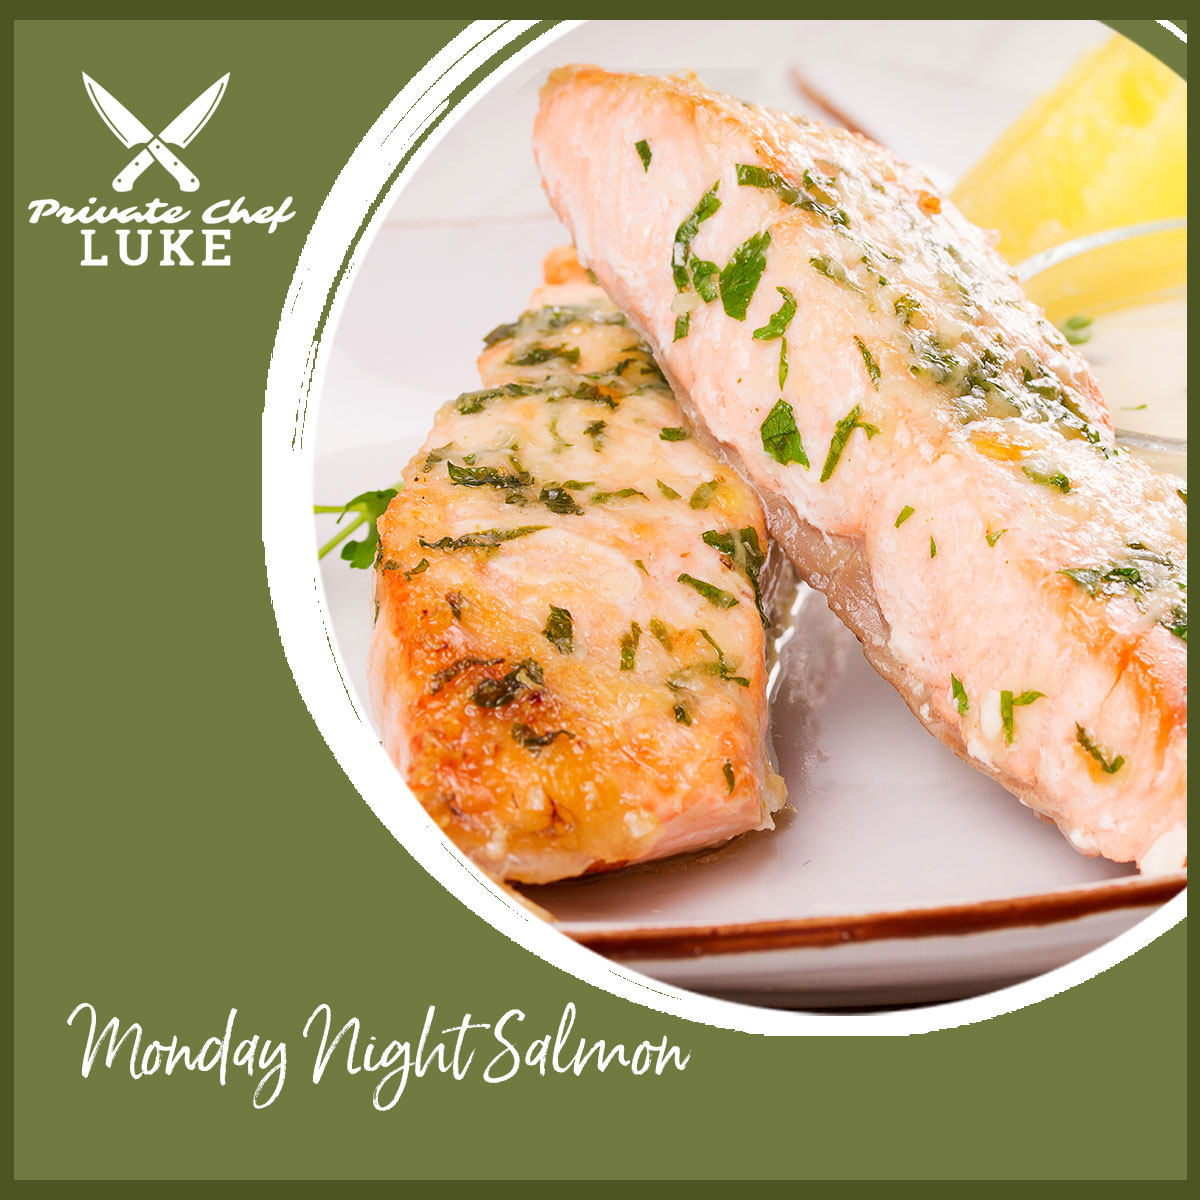 Click to download a copy of Chef Luke's recipe for Monday Night Salmon.